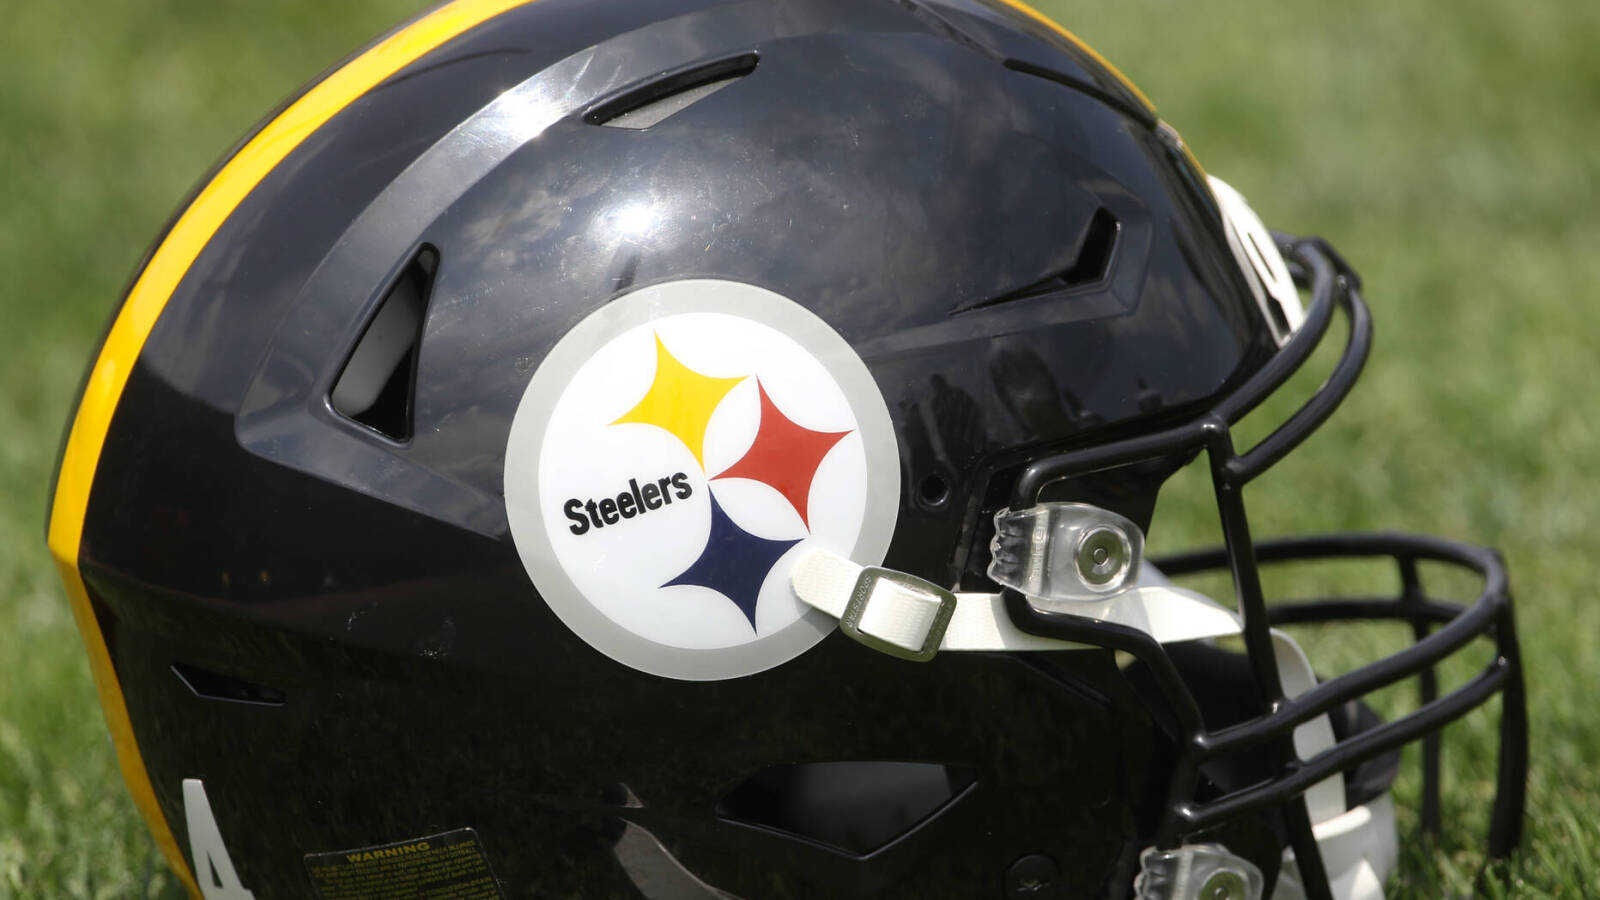 Steelers starting second round of interviews for vacant GM post